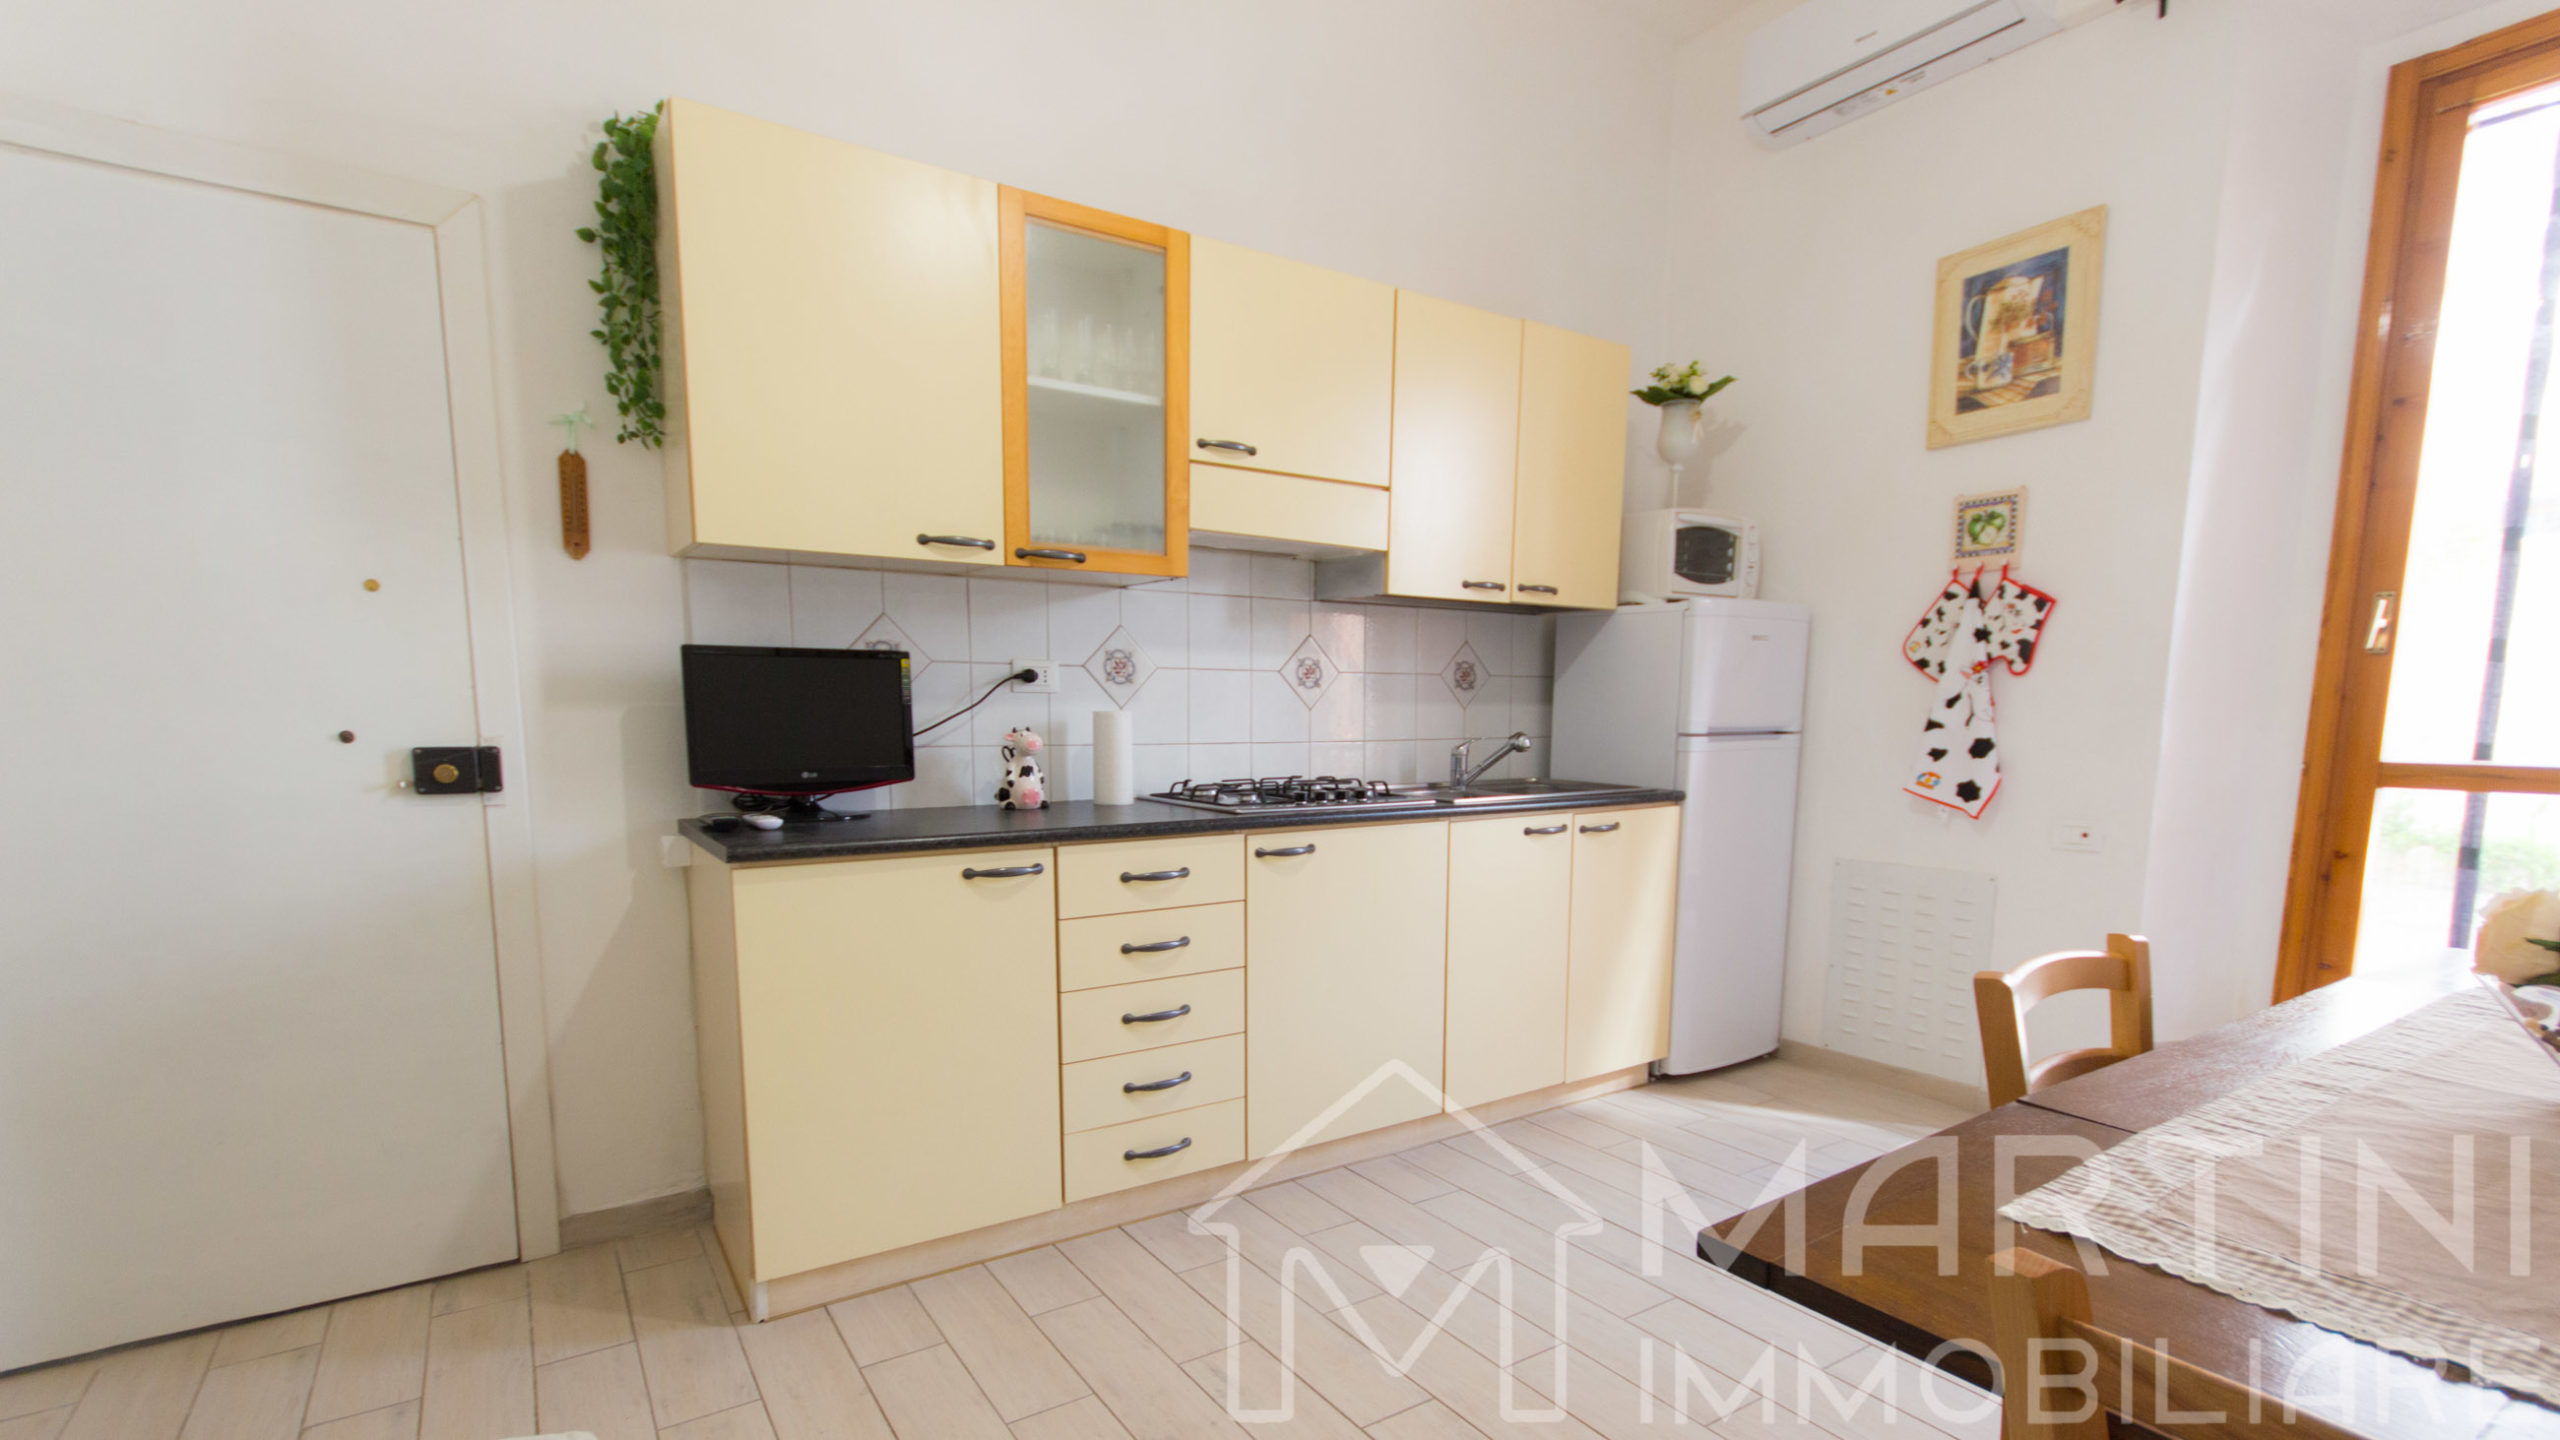 Follonica Apartment to Rent with Outdoor Space